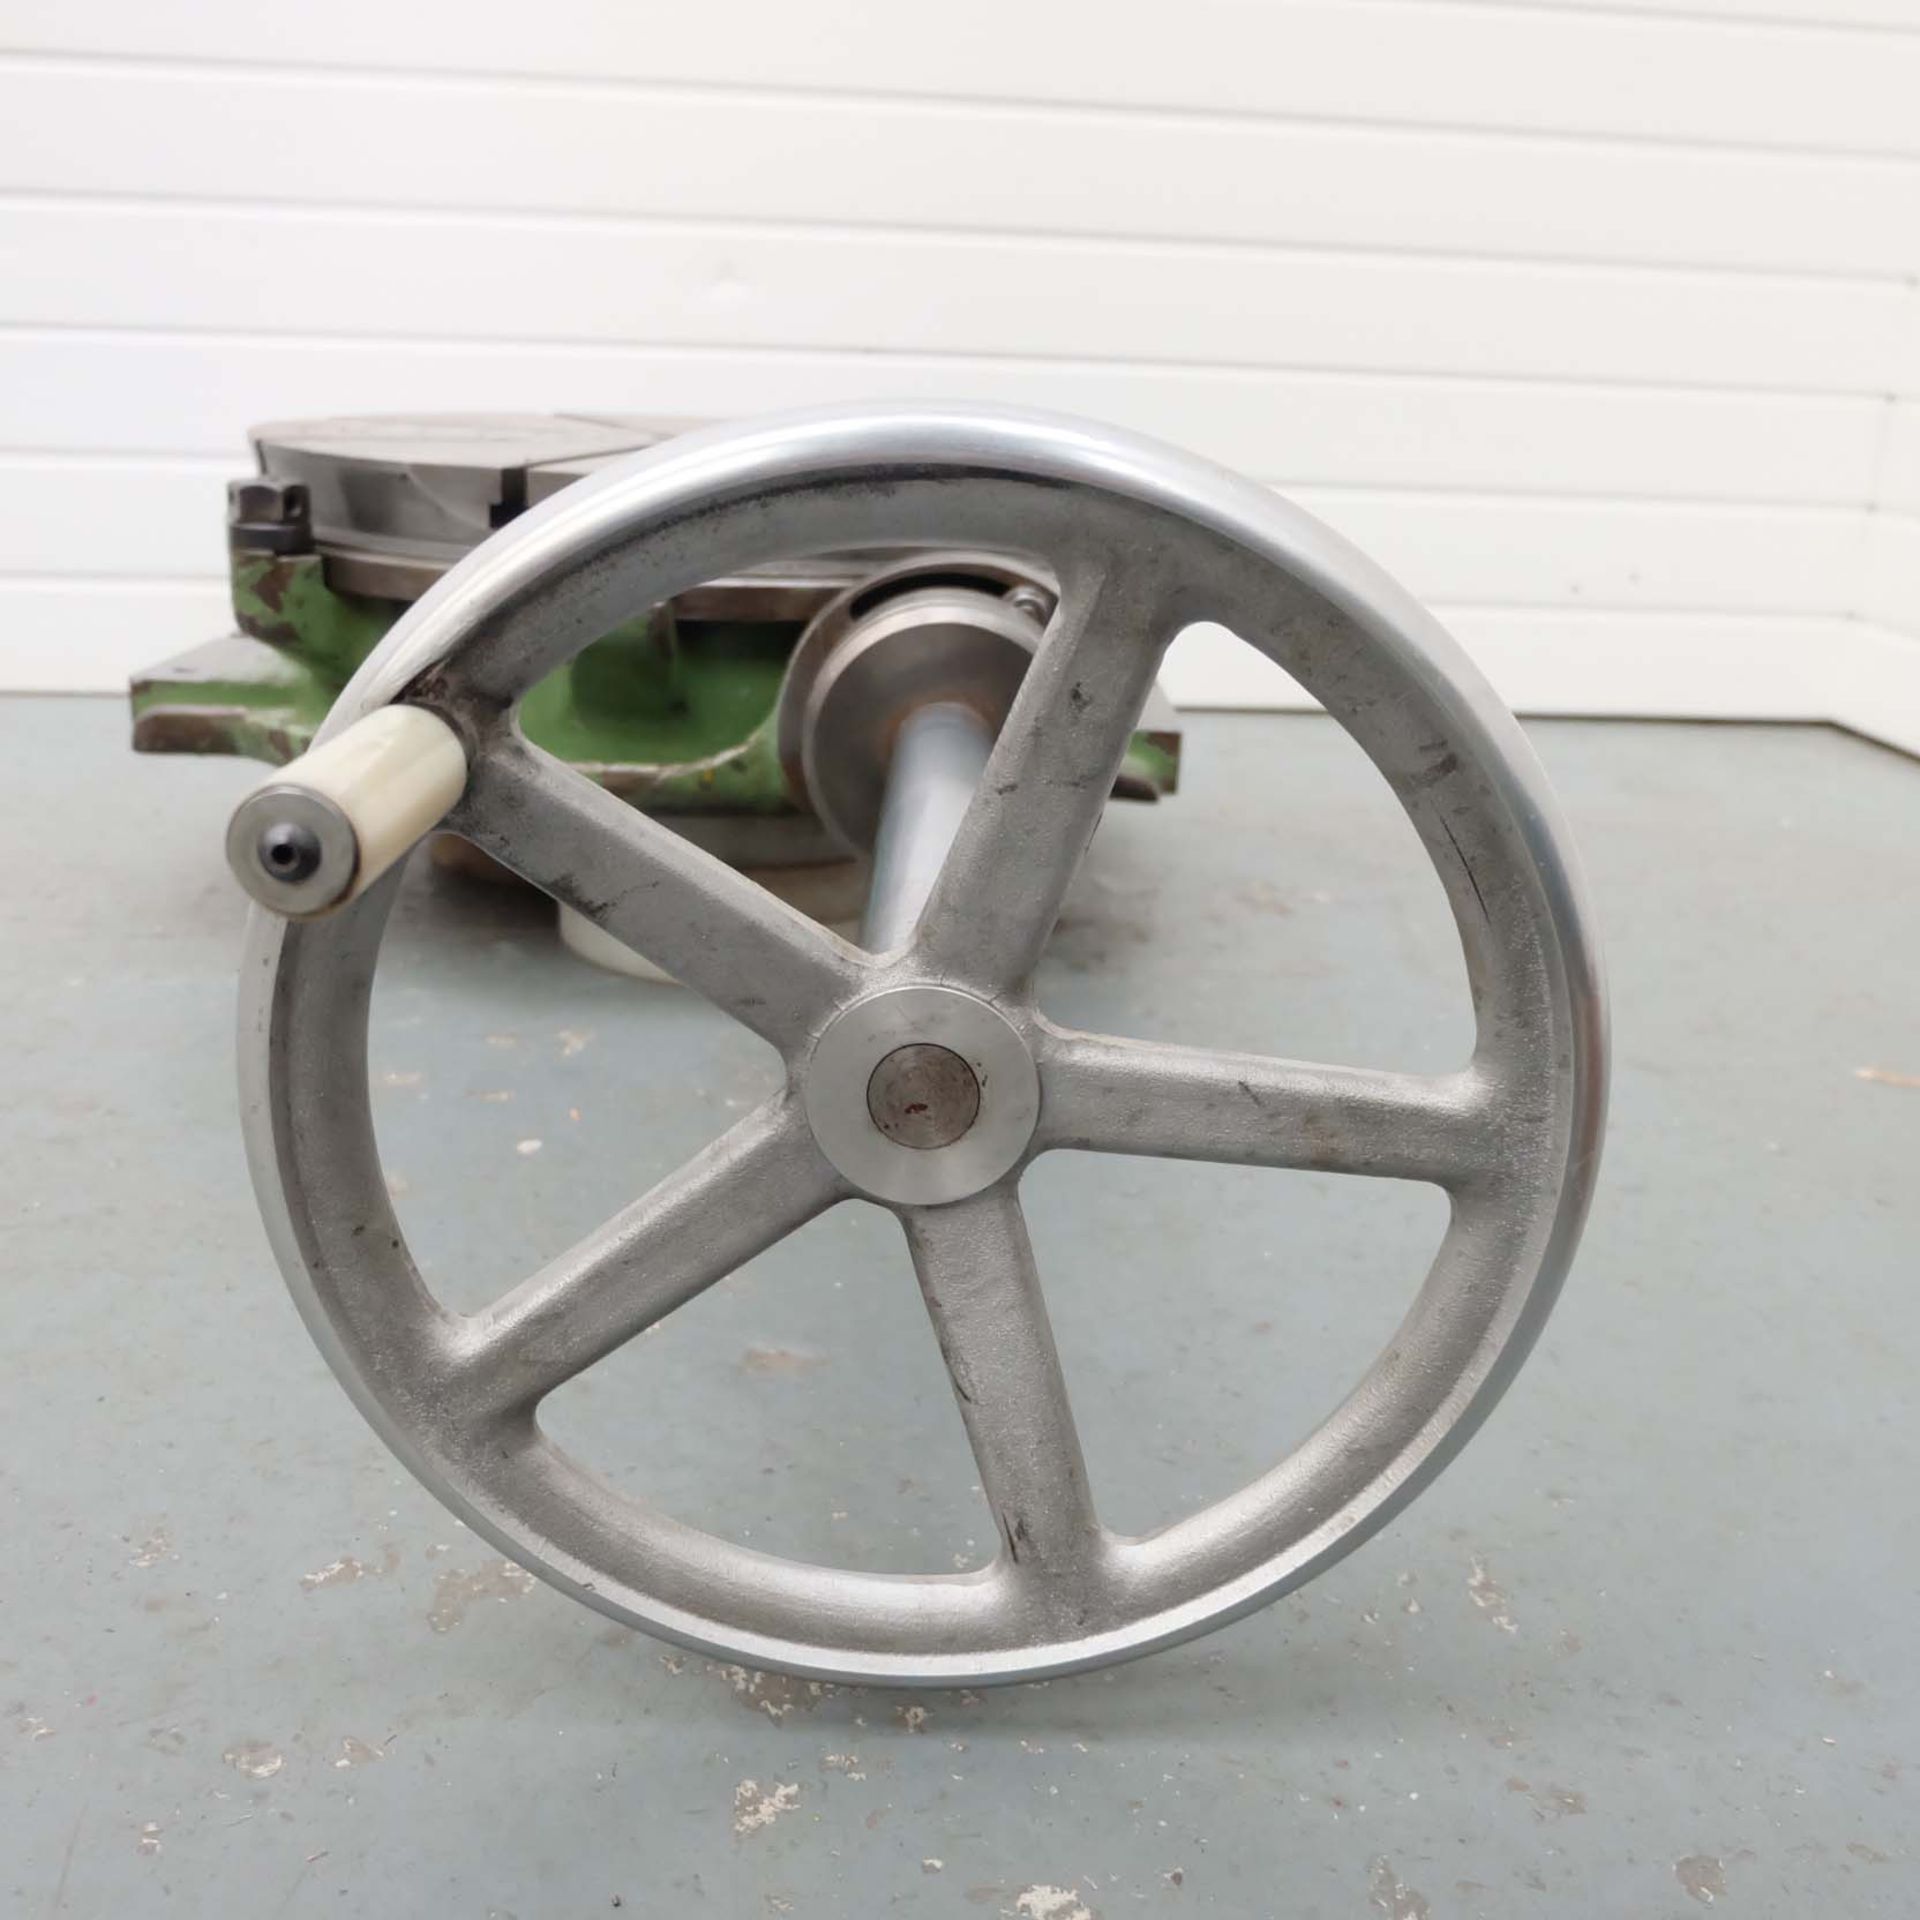 MECA 19 1/2" Rotary Table. With Extended Handwheel 14". Tee Slotted. - Image 7 of 7